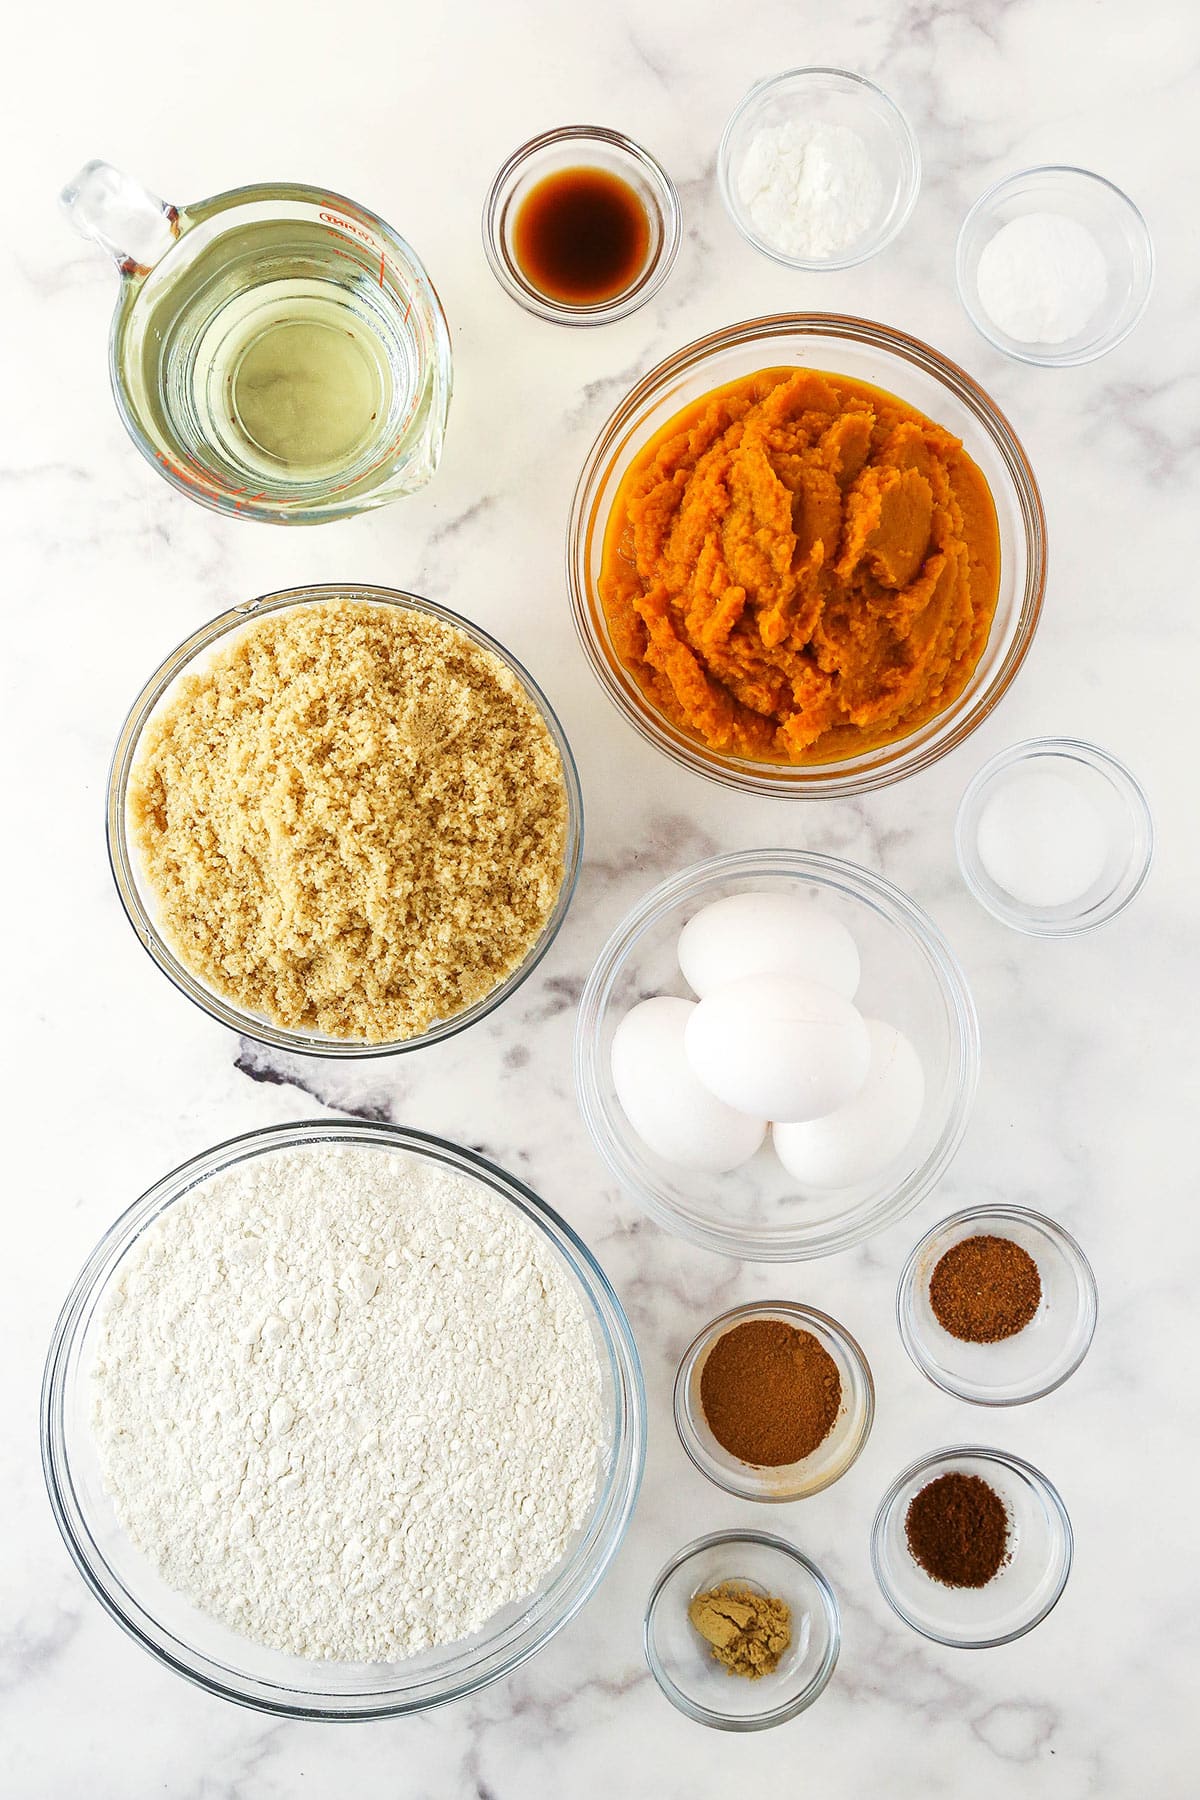 Eggs, cinnamon, nutmeg, ginger and the rest of the ingredients arranged neatly on a kitchen countertop.